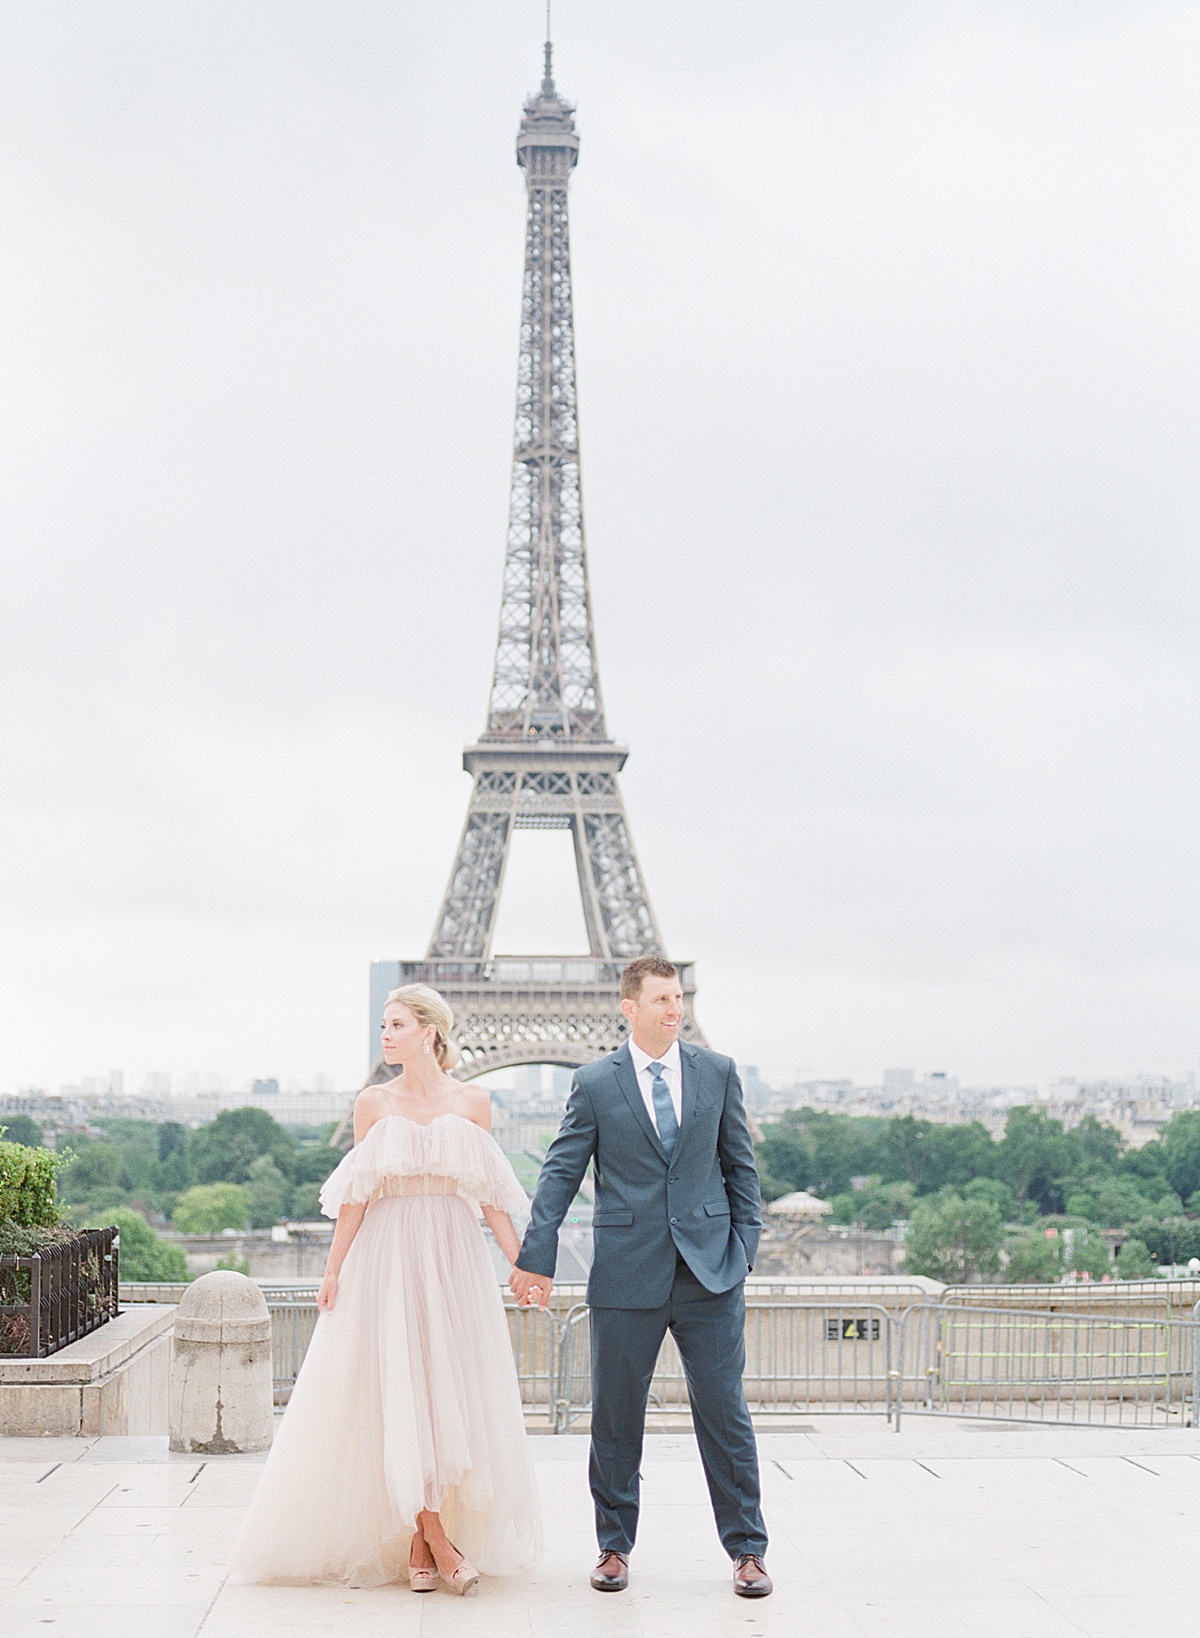 Eiffel Tower Wedding Bride and Groom Holding Hands Looking off Photo